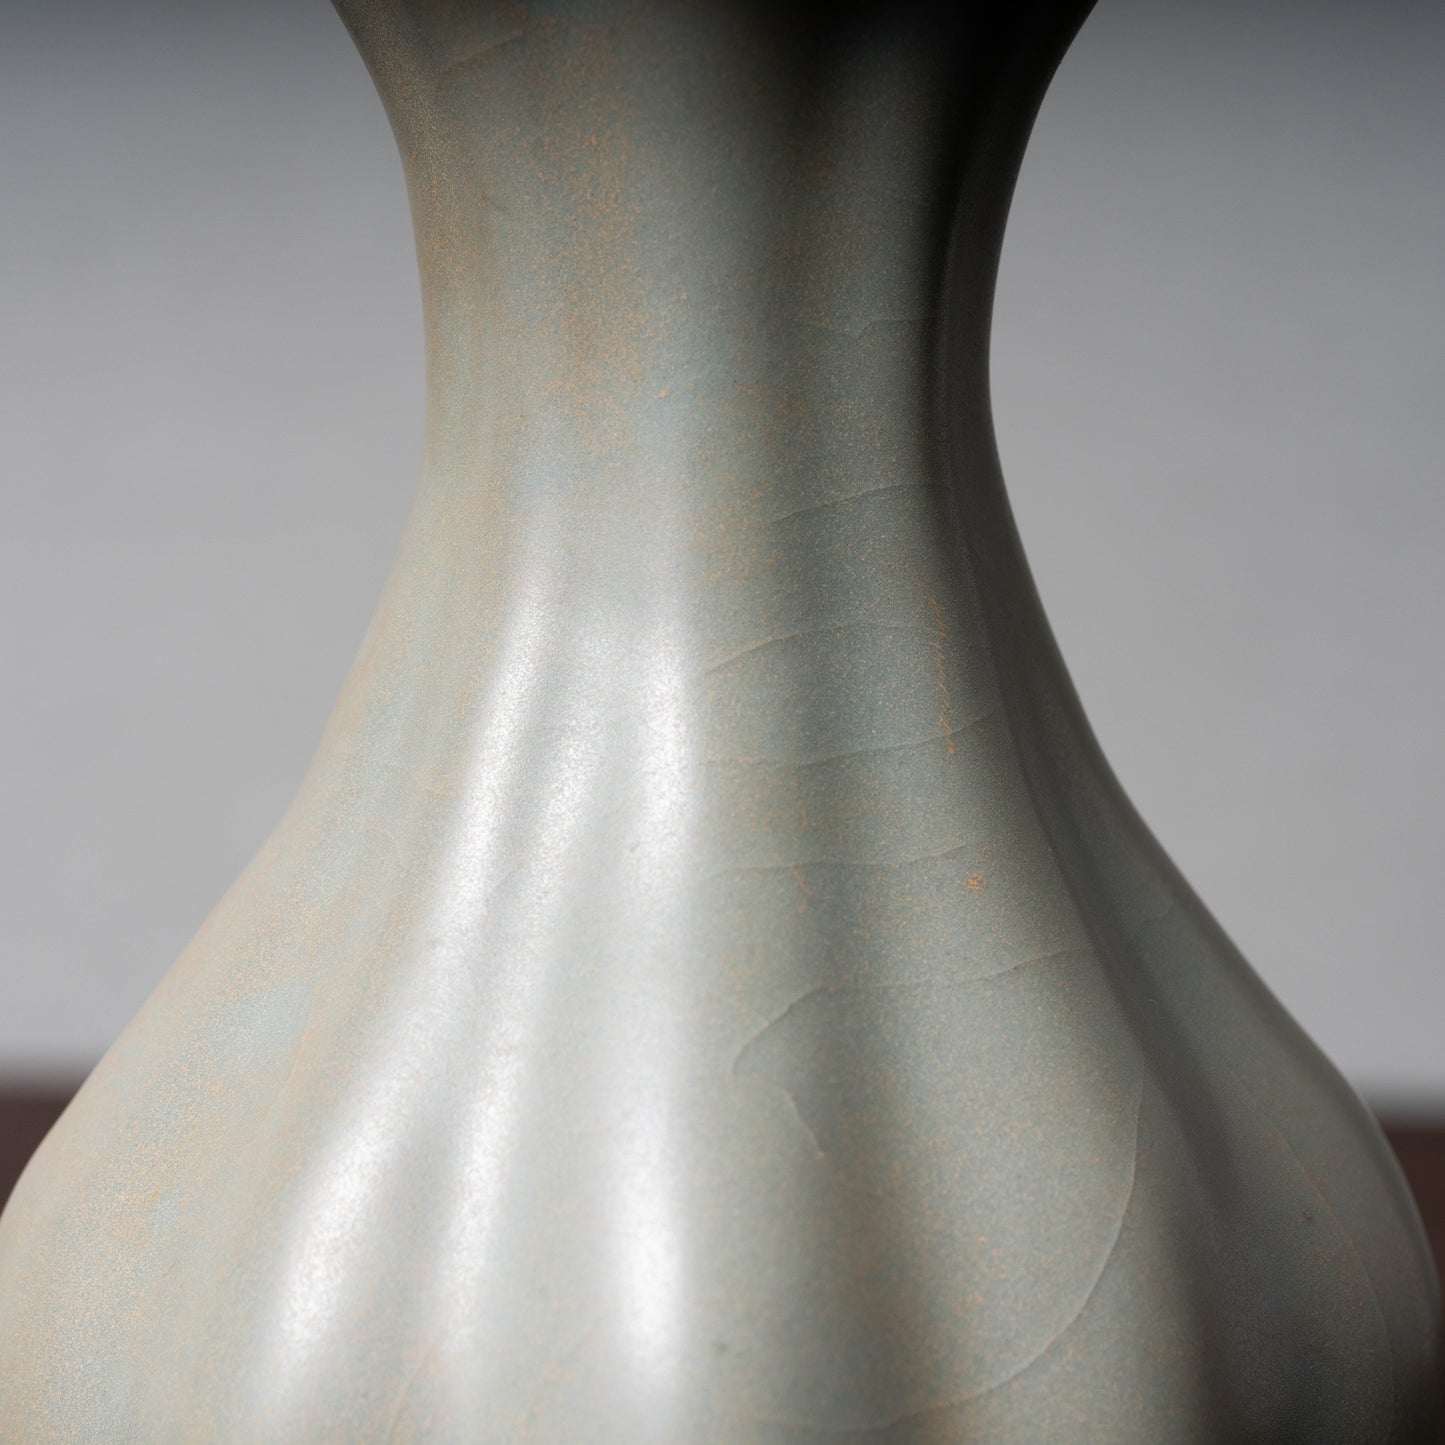 Southern Song Dynasty Longquan Celadon Vase with Gourd and Flower Design